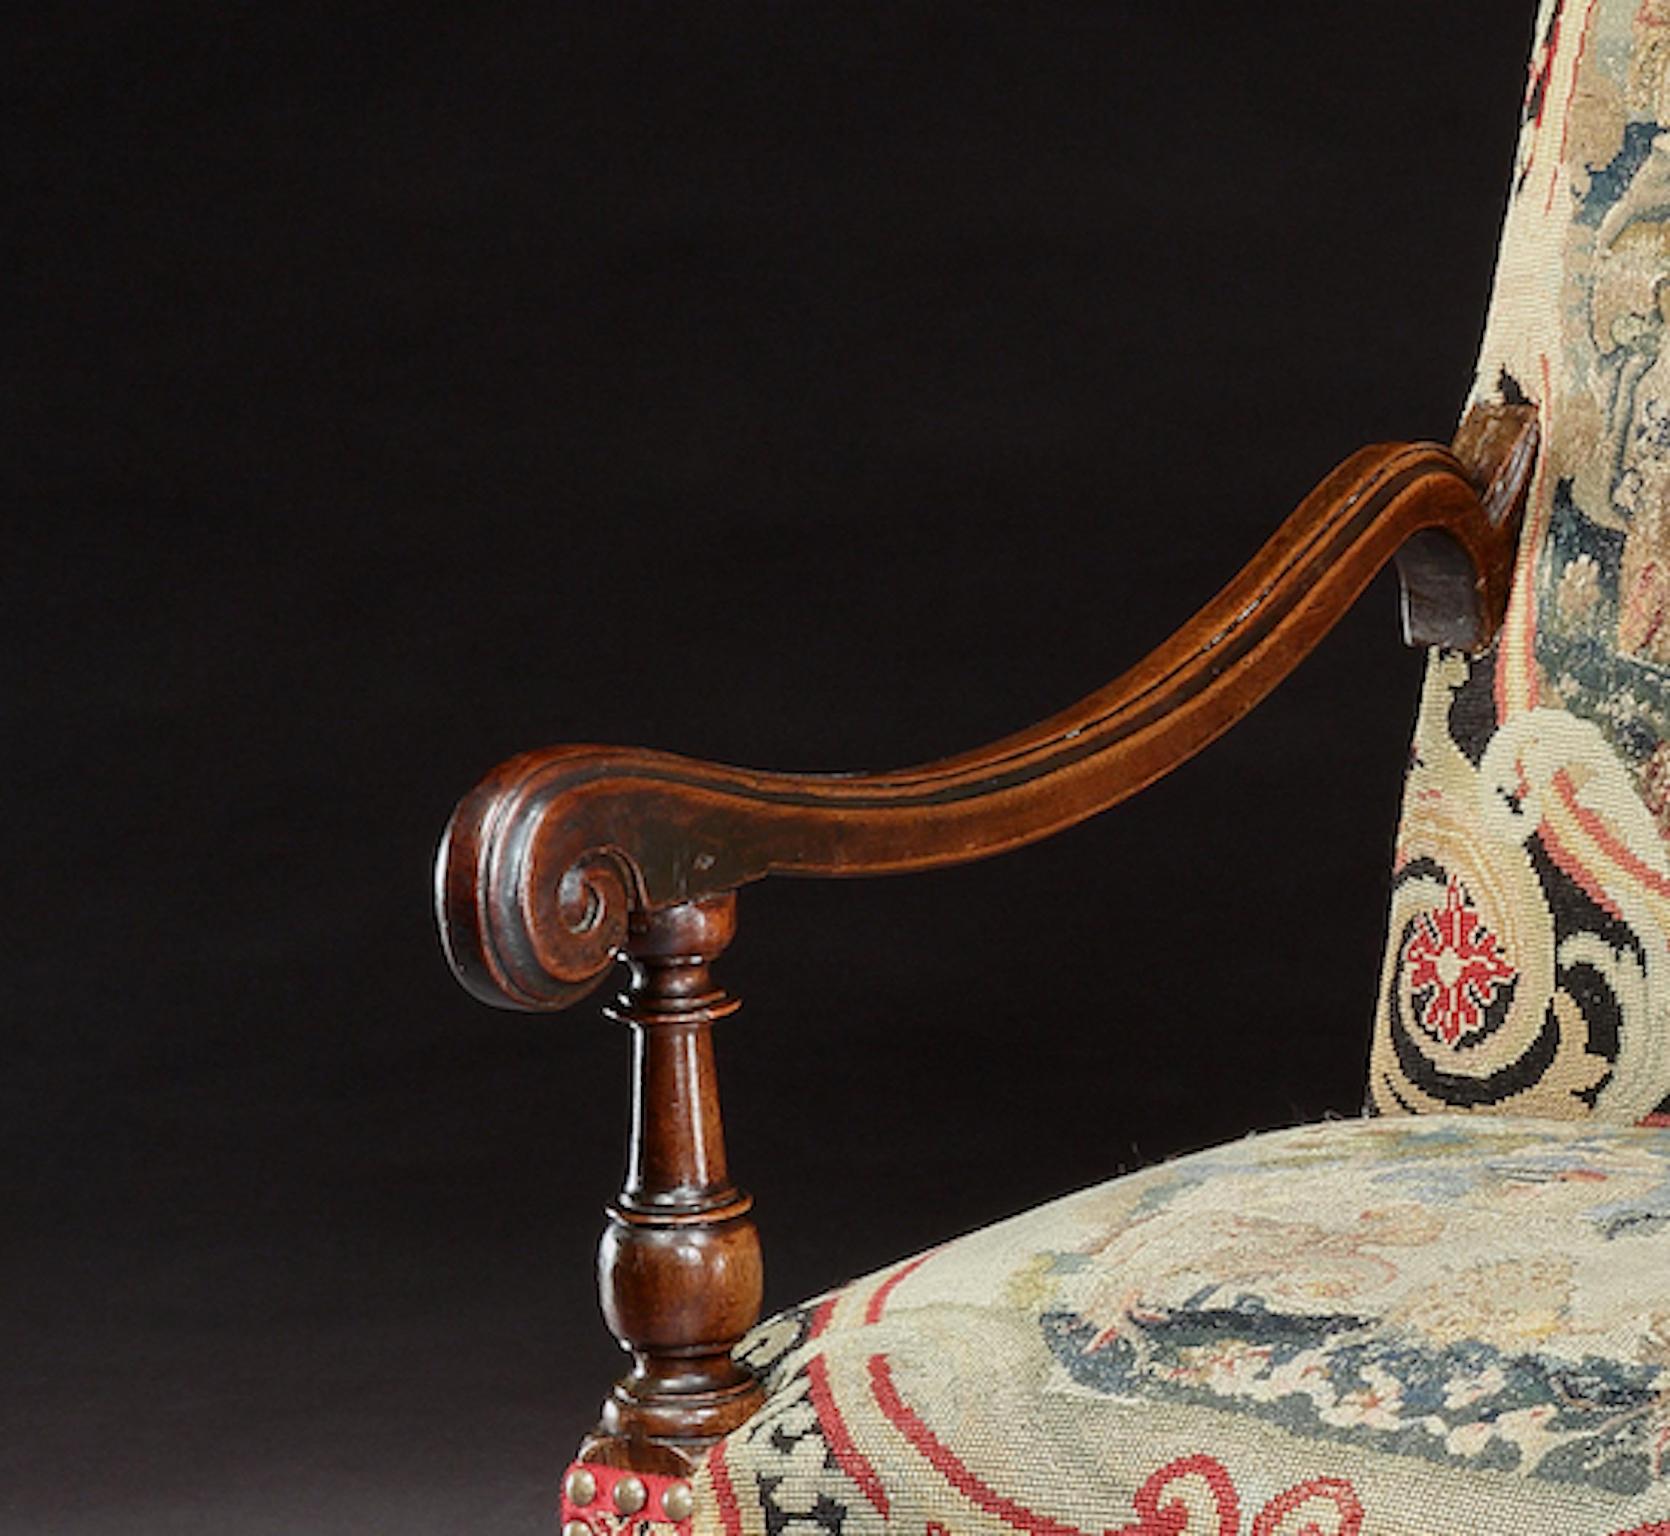 An exceptional, museum quality, English, baroque, walnut, open armchair with faceted legs and shaped ‘x’ stretcher, upholstered in fine Georgian needlework with 19th century needlework borders


Faceted front and back legs are only found on the